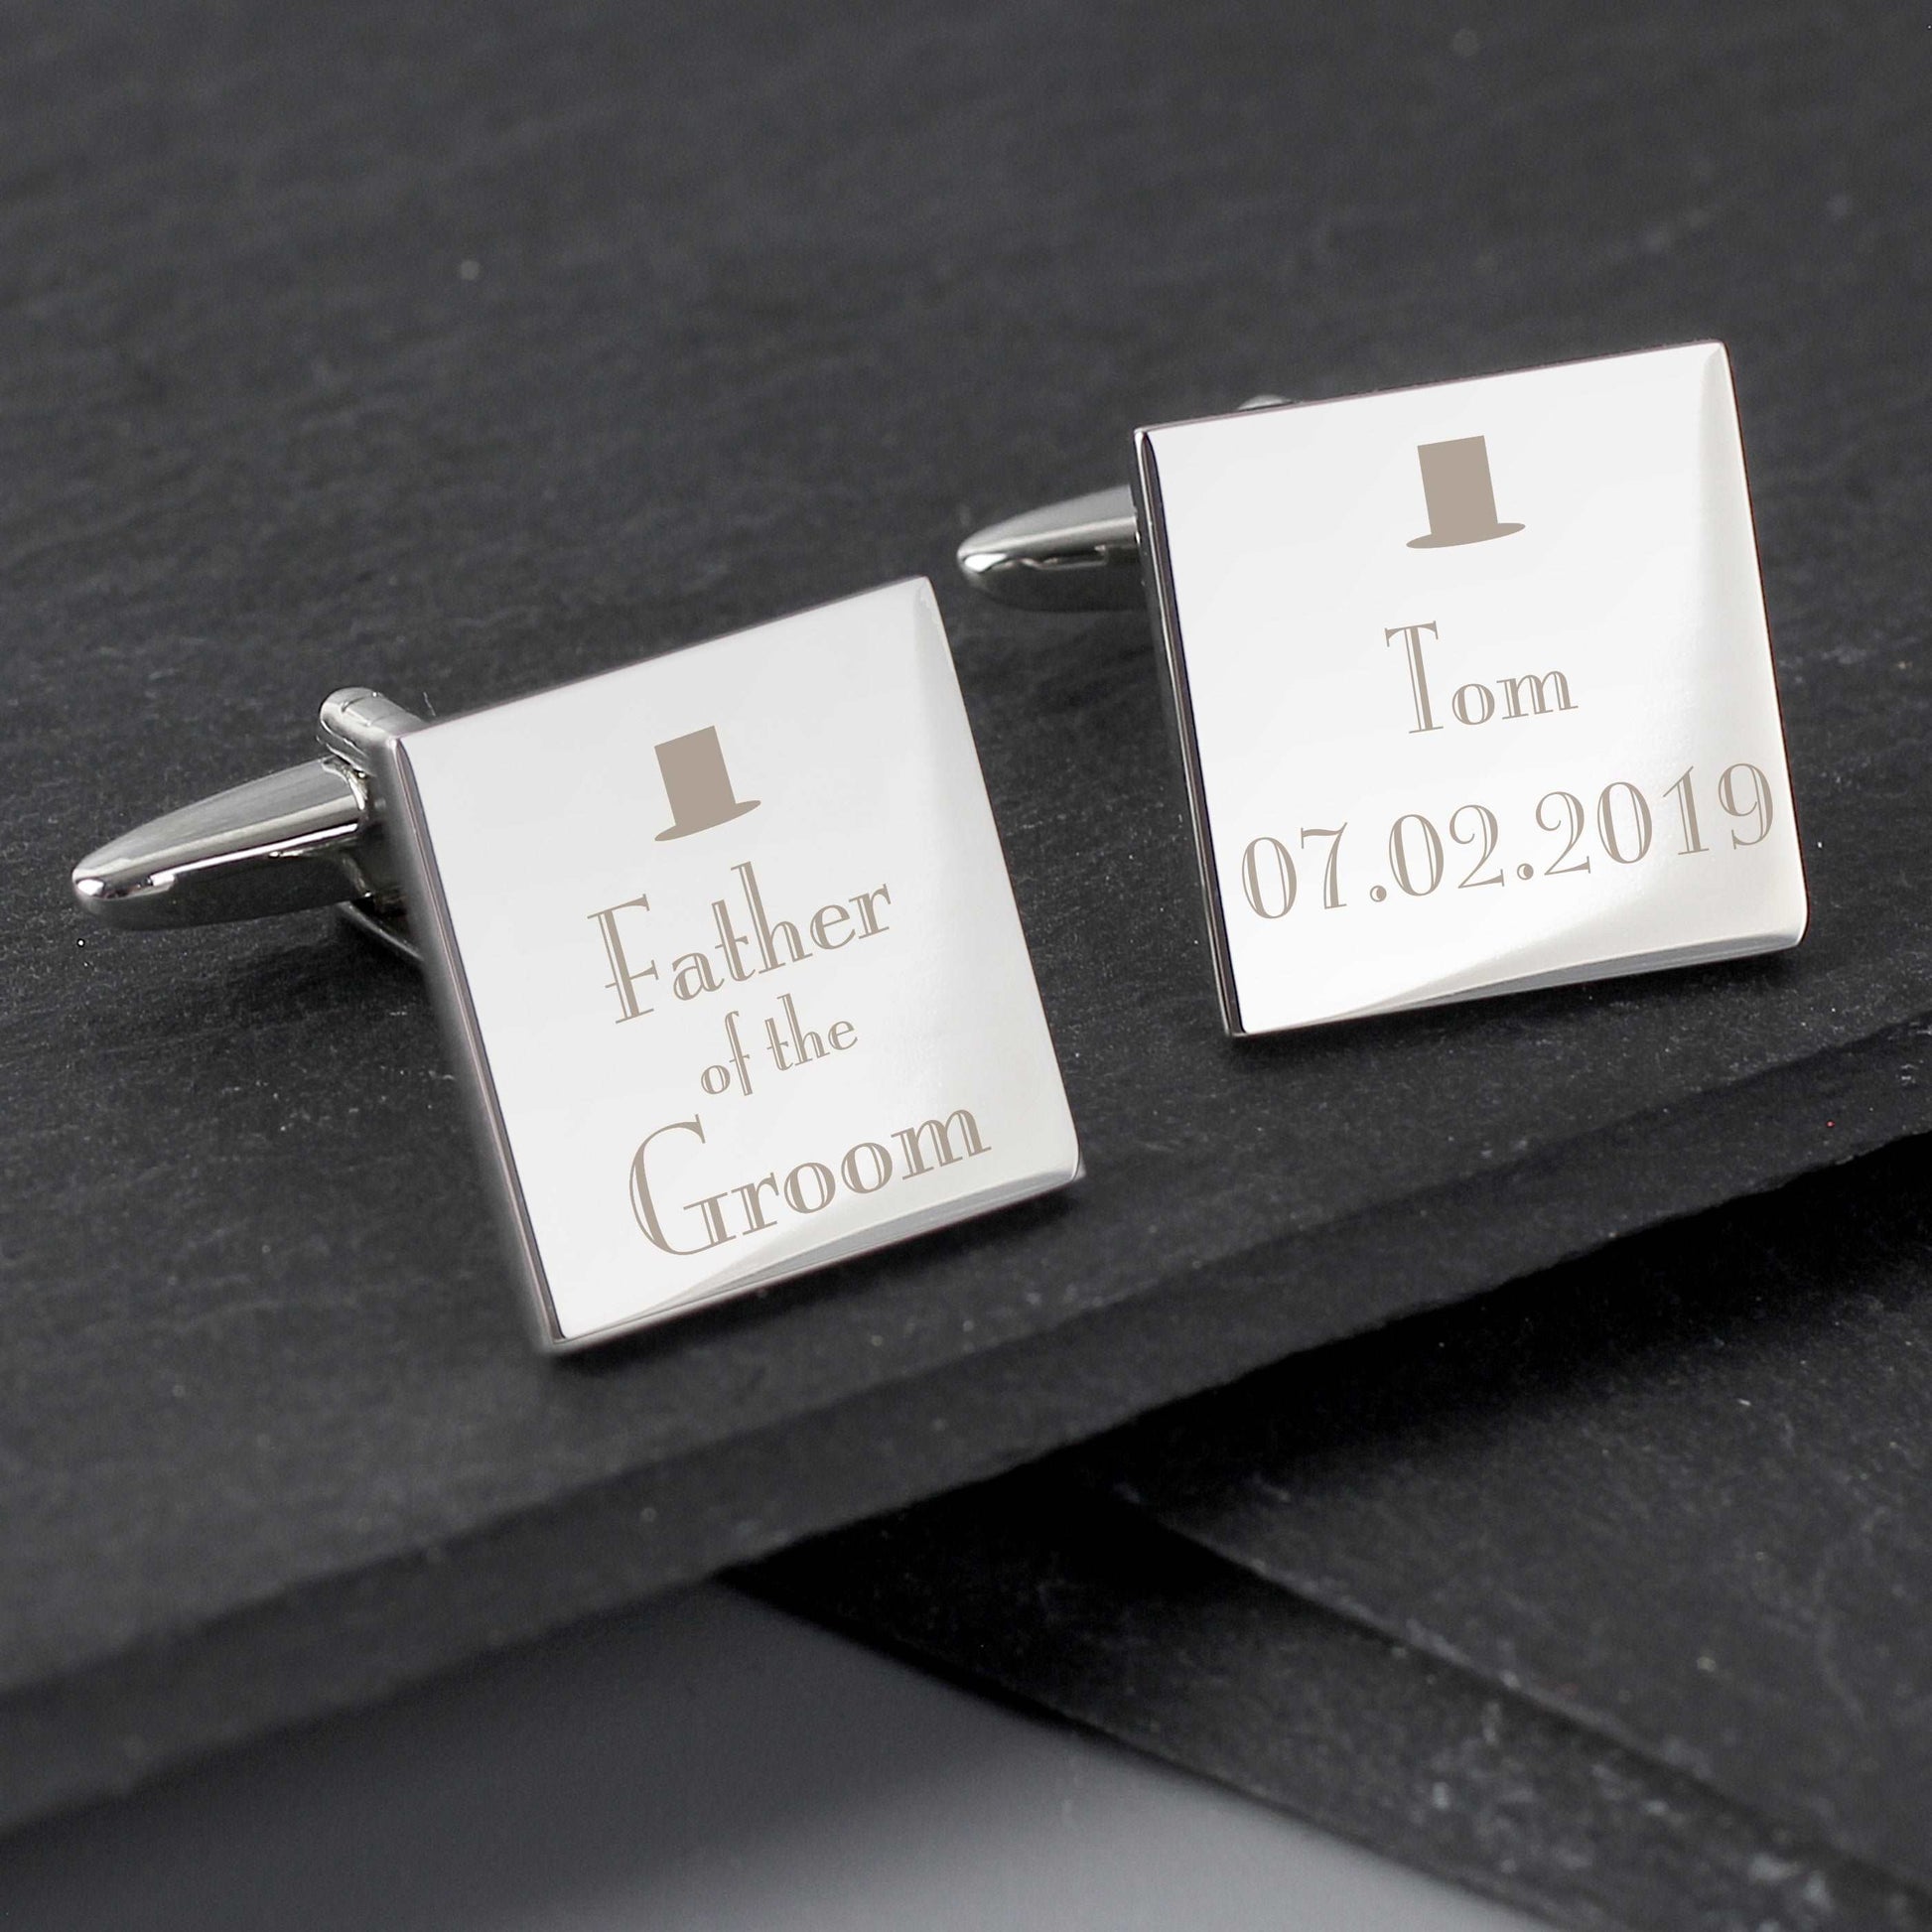 Decorative Wedding Father of the Groom Square Cufflinks personalised 